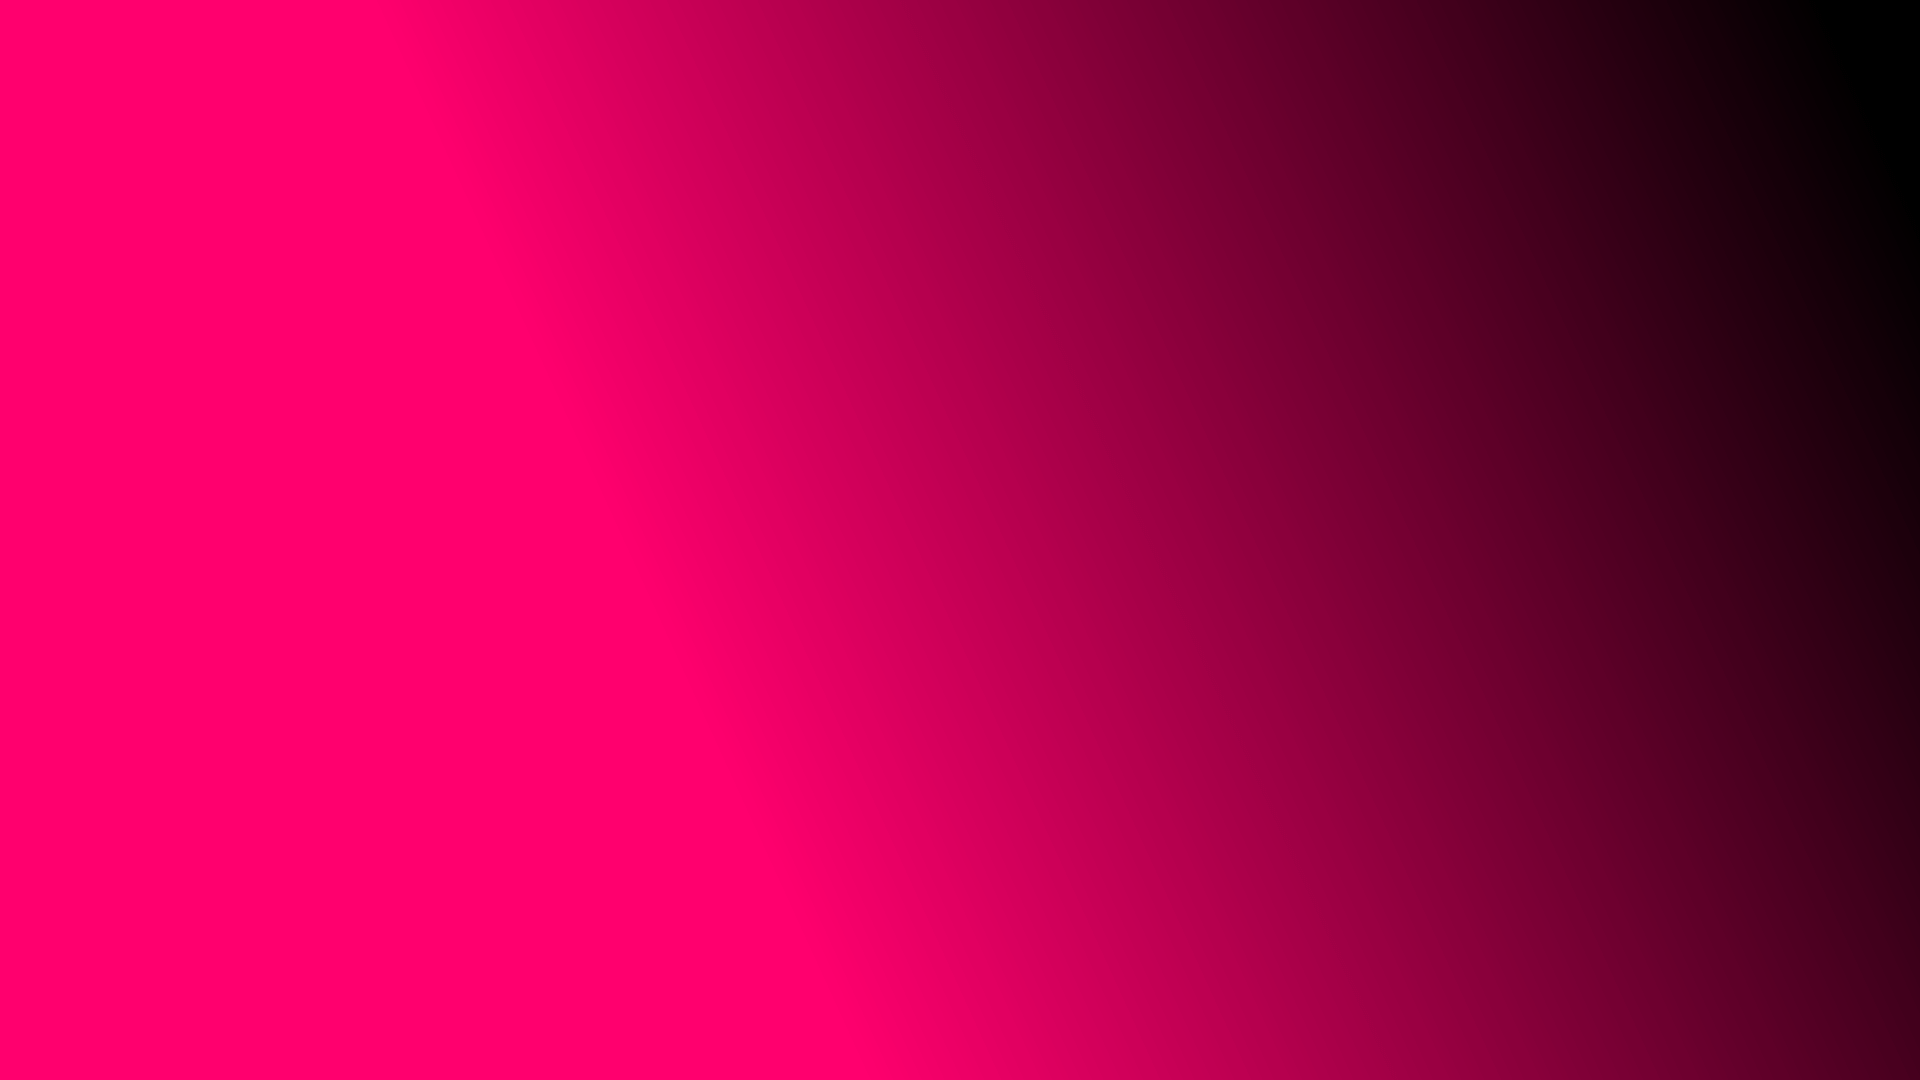 Pink And Black Background HD